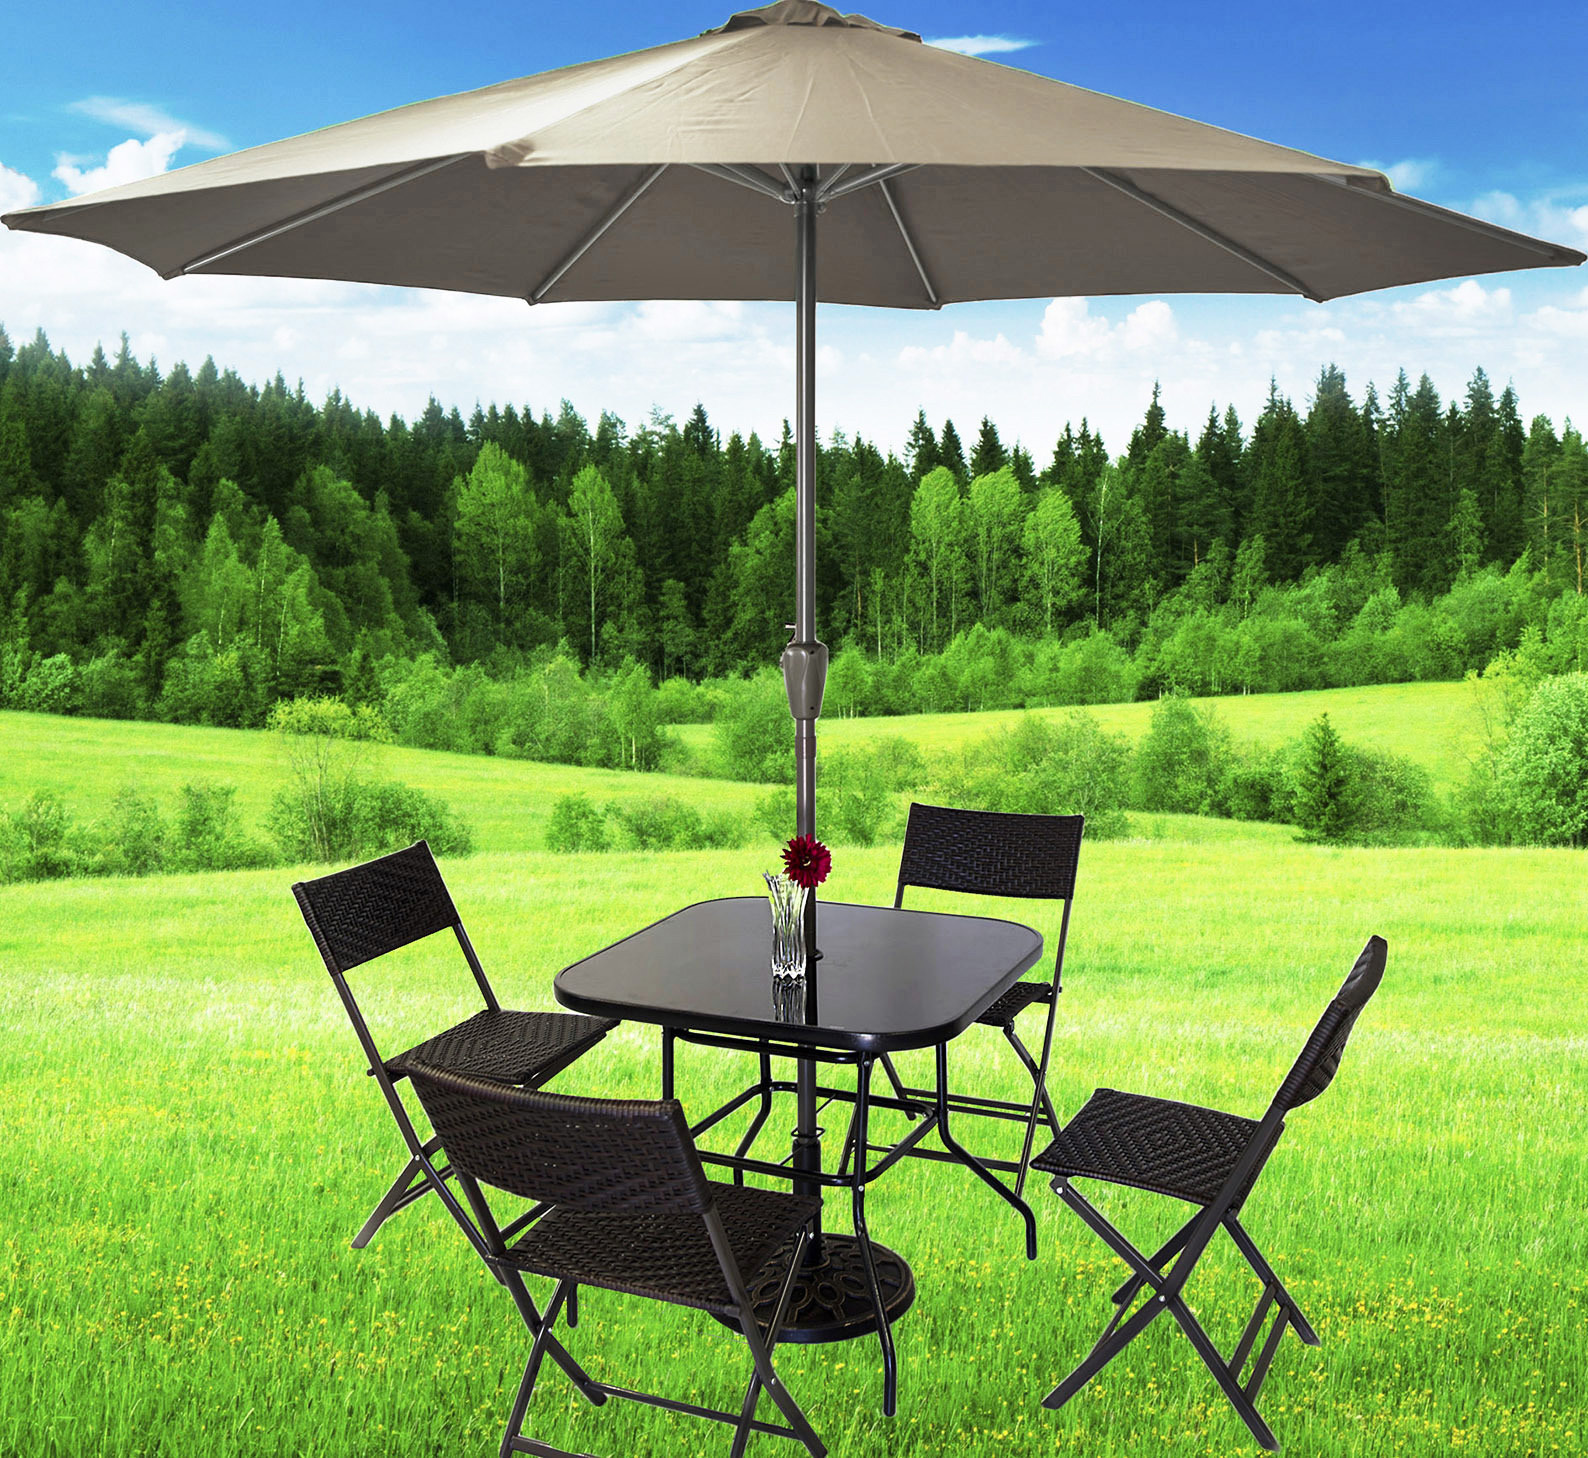 Alfresco 7 Piece Outdoor Setting (Beige Umbrella & Stand, 4 Rattan Chairs, Square Table)